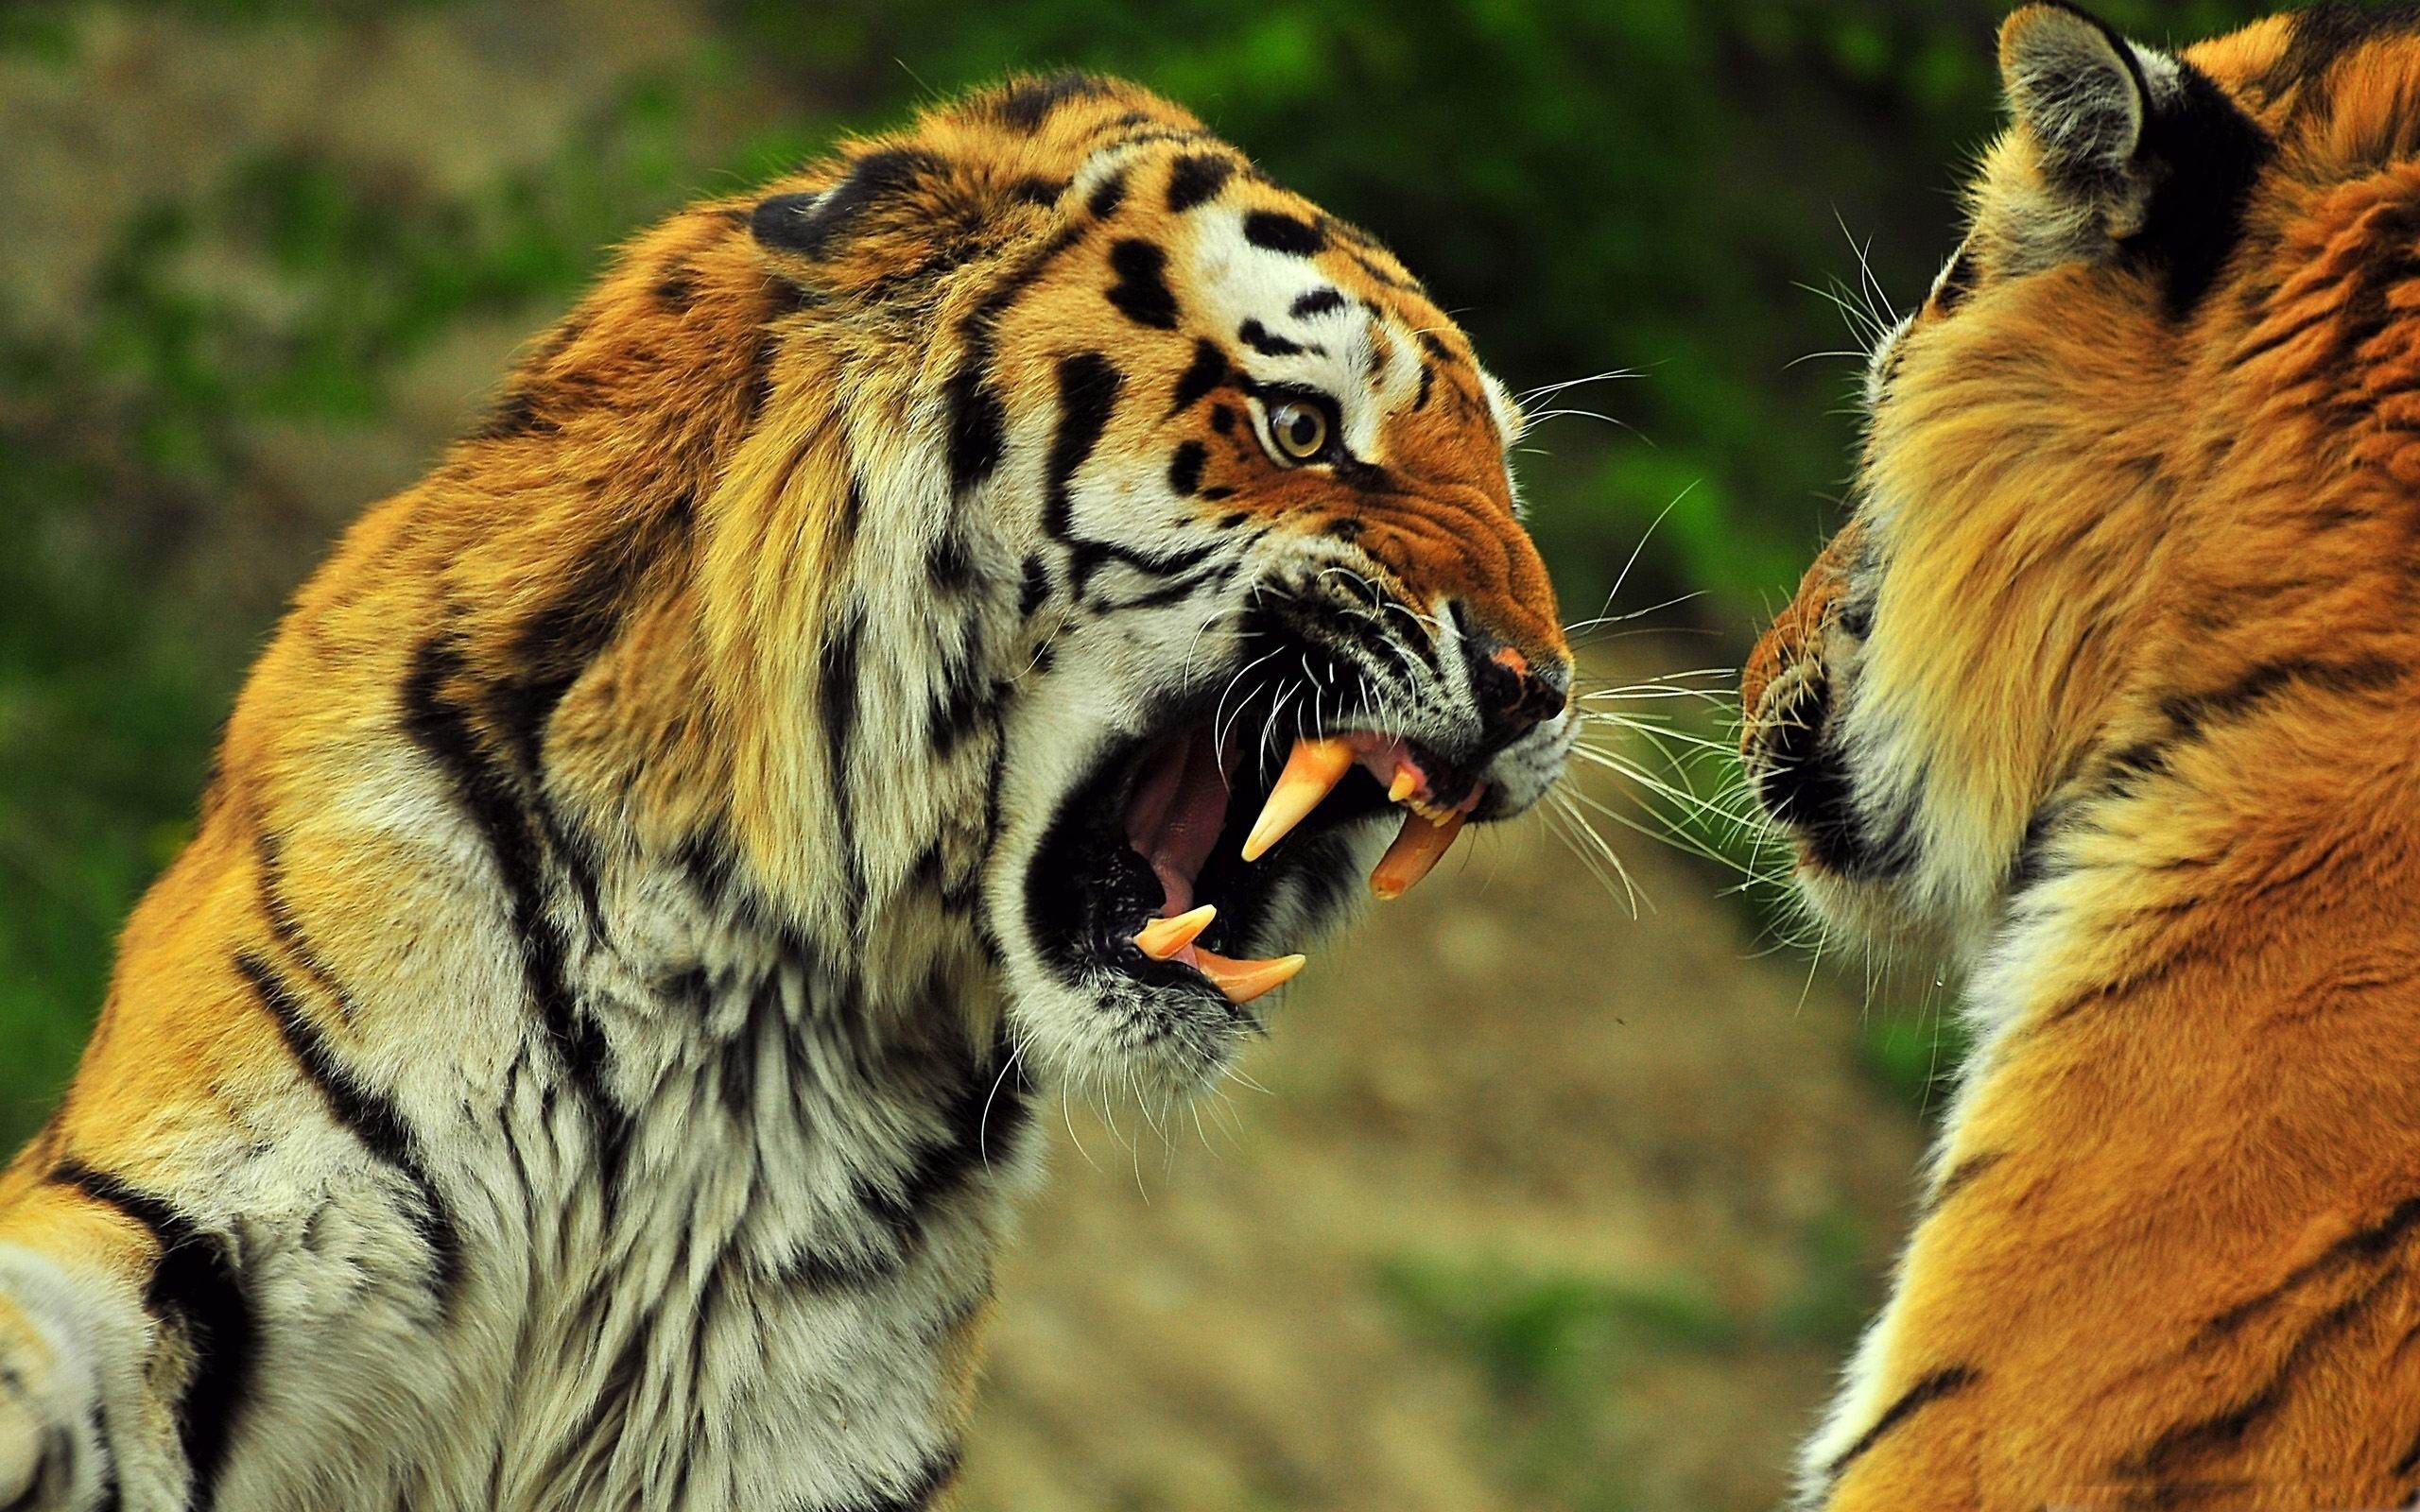 Wild Animals Wallpaper Tiger Wallpaper - High Quality Images Of Animals , HD Wallpaper & Backgrounds